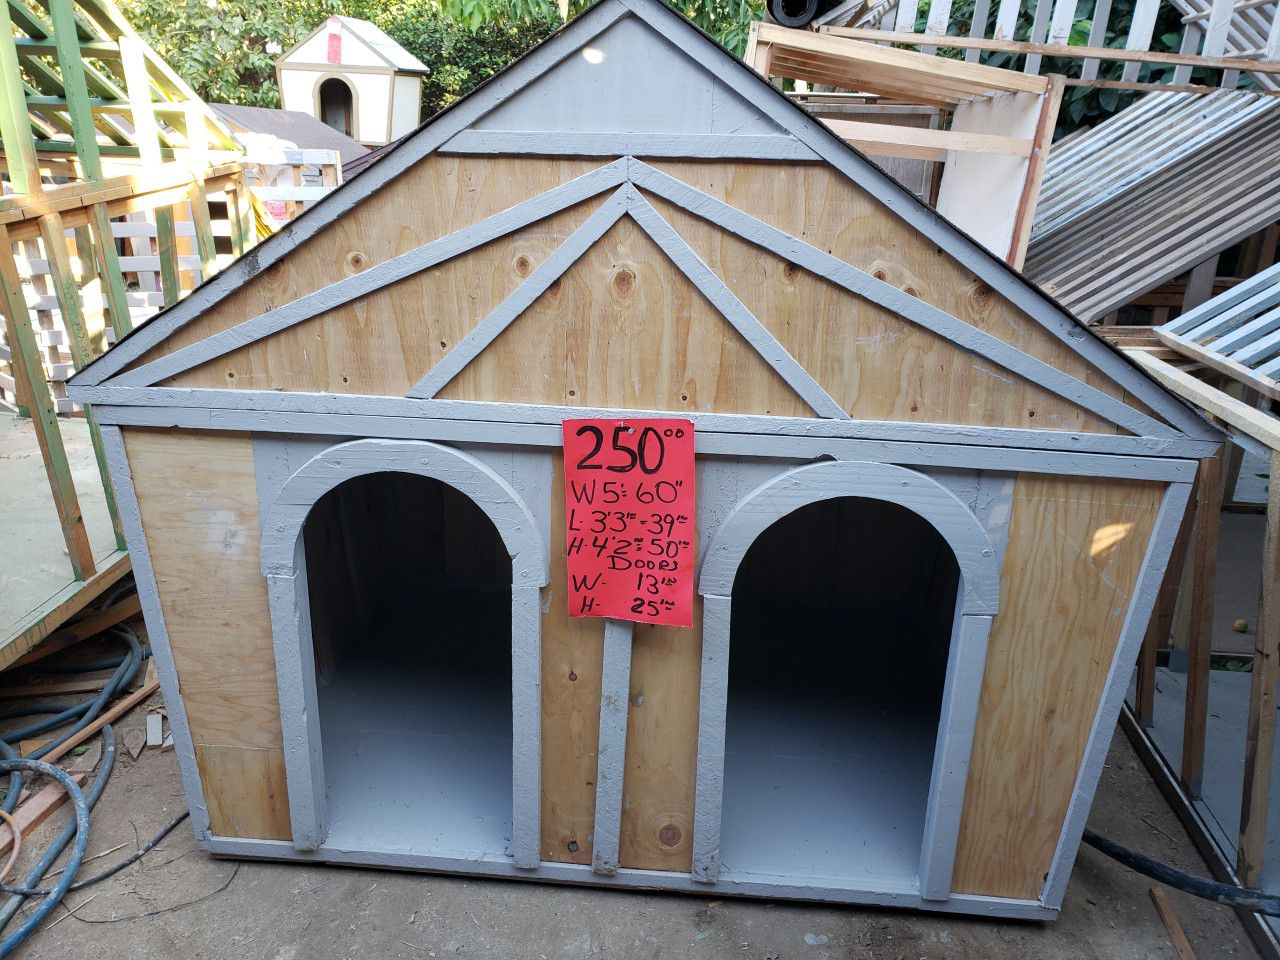 large gray dog house for sale $250